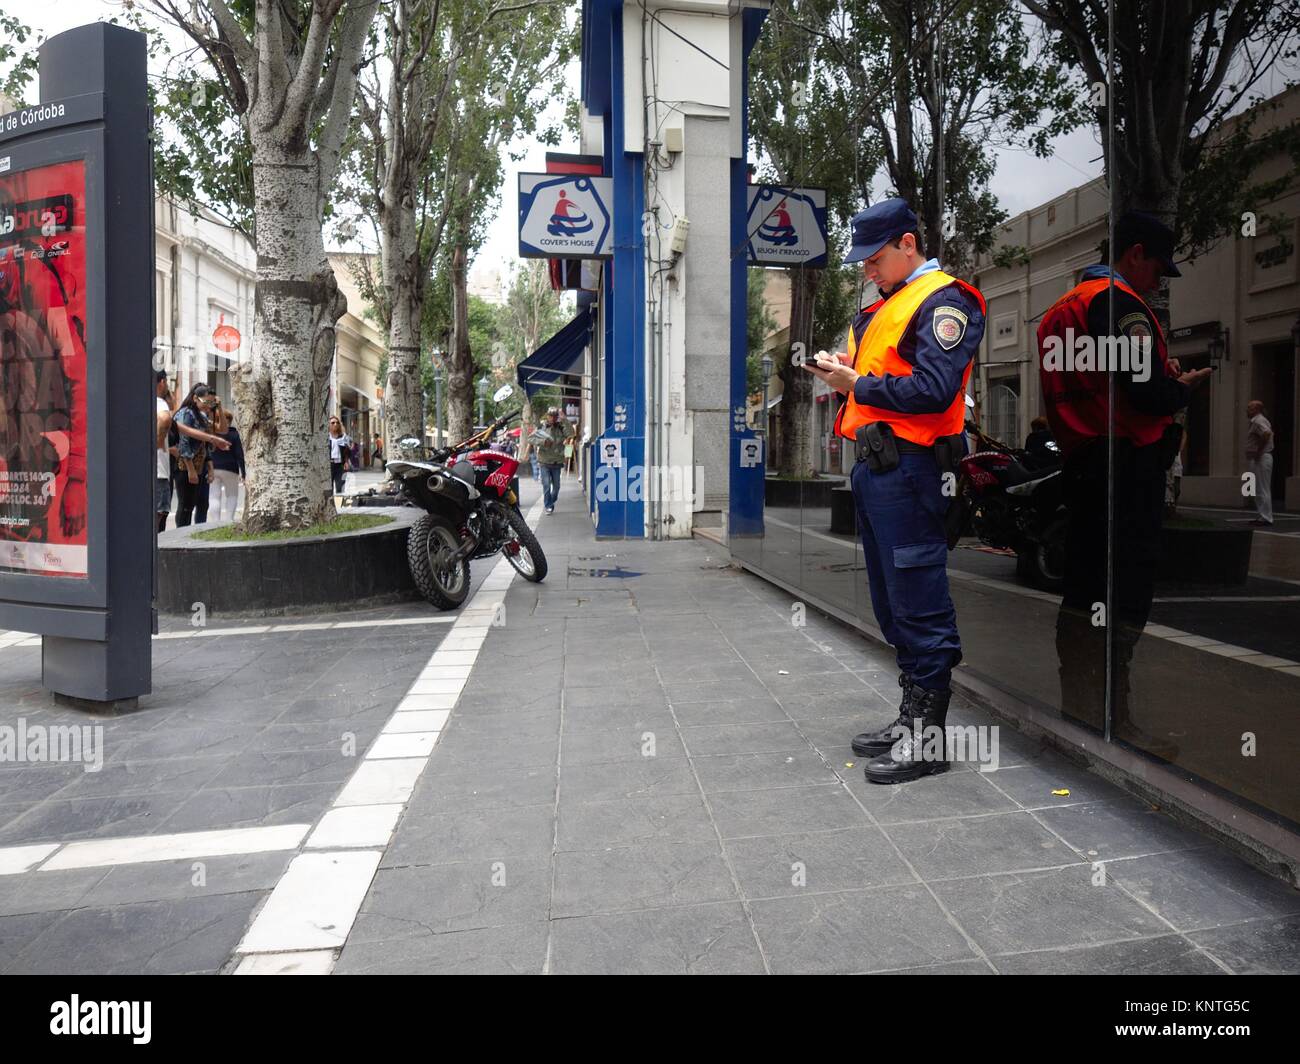 Cordoba, Argentina - 2017: An on duty police officer appears to be distracted on his cellular phone. Stock Photo